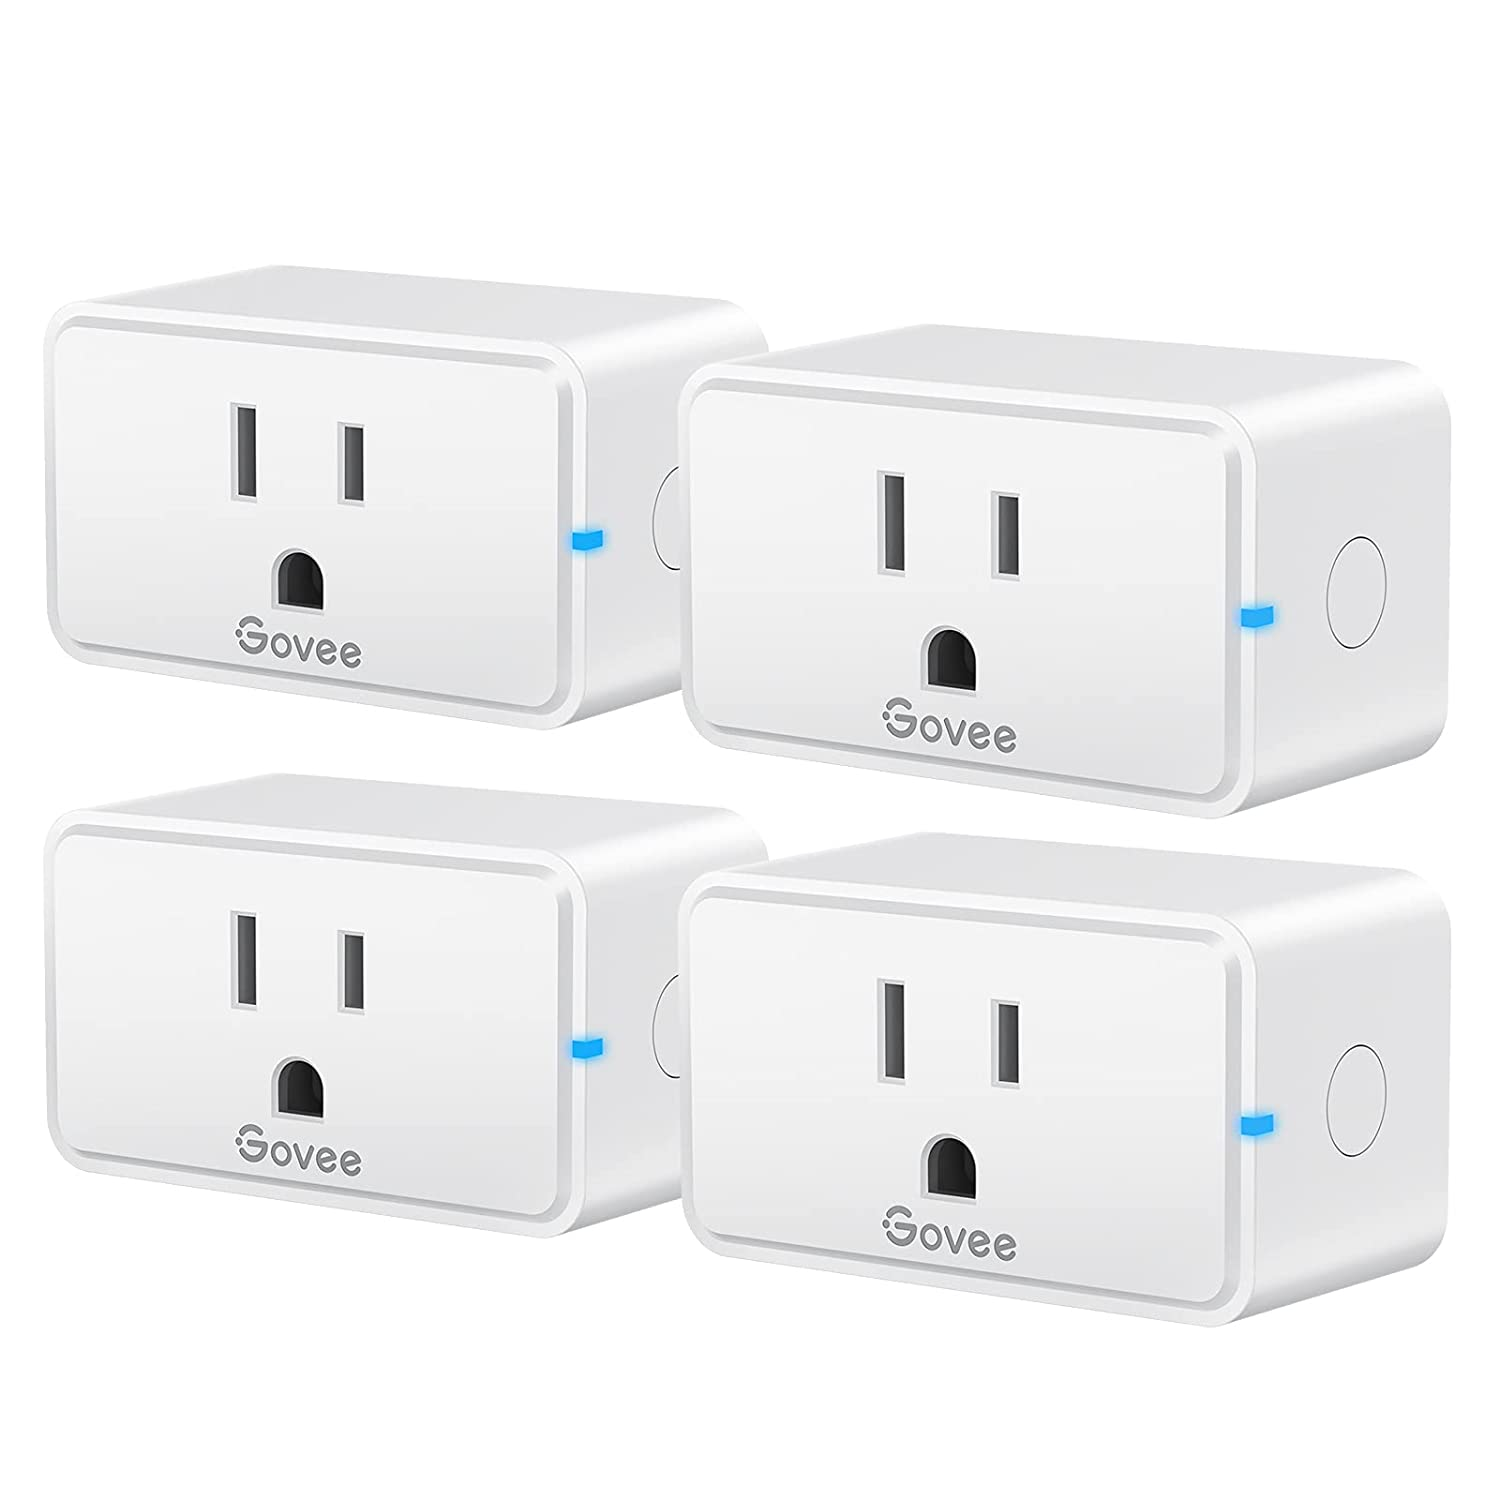 Govee Smart Plug, Bluetooth & WiFi Outlet Works with Alexa and Google Assistant, No Hub $17